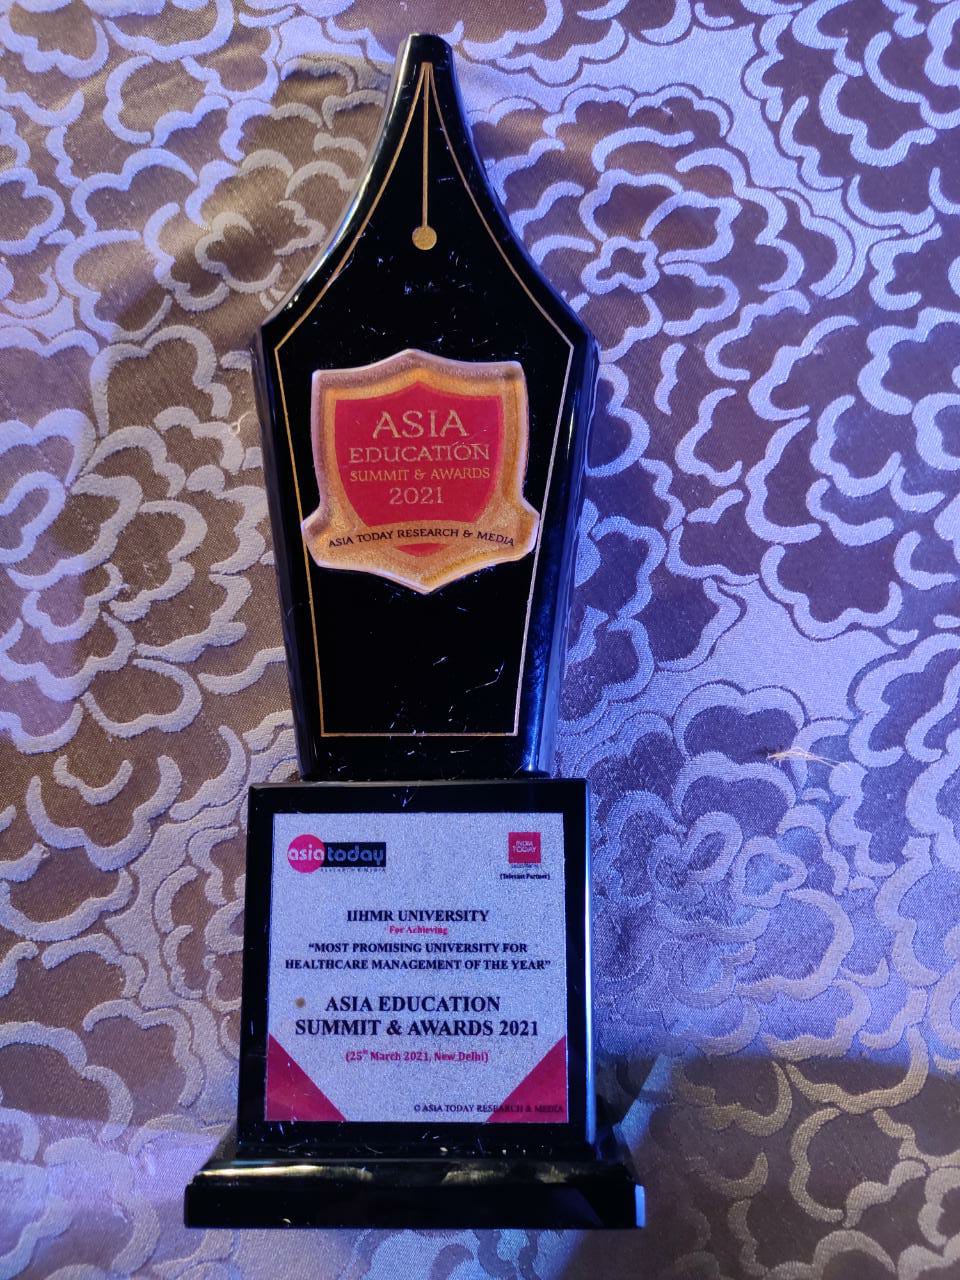 IIHMR University conferred with 11th Asia Education Summit Awards 2021 for Healthcare Management of the year